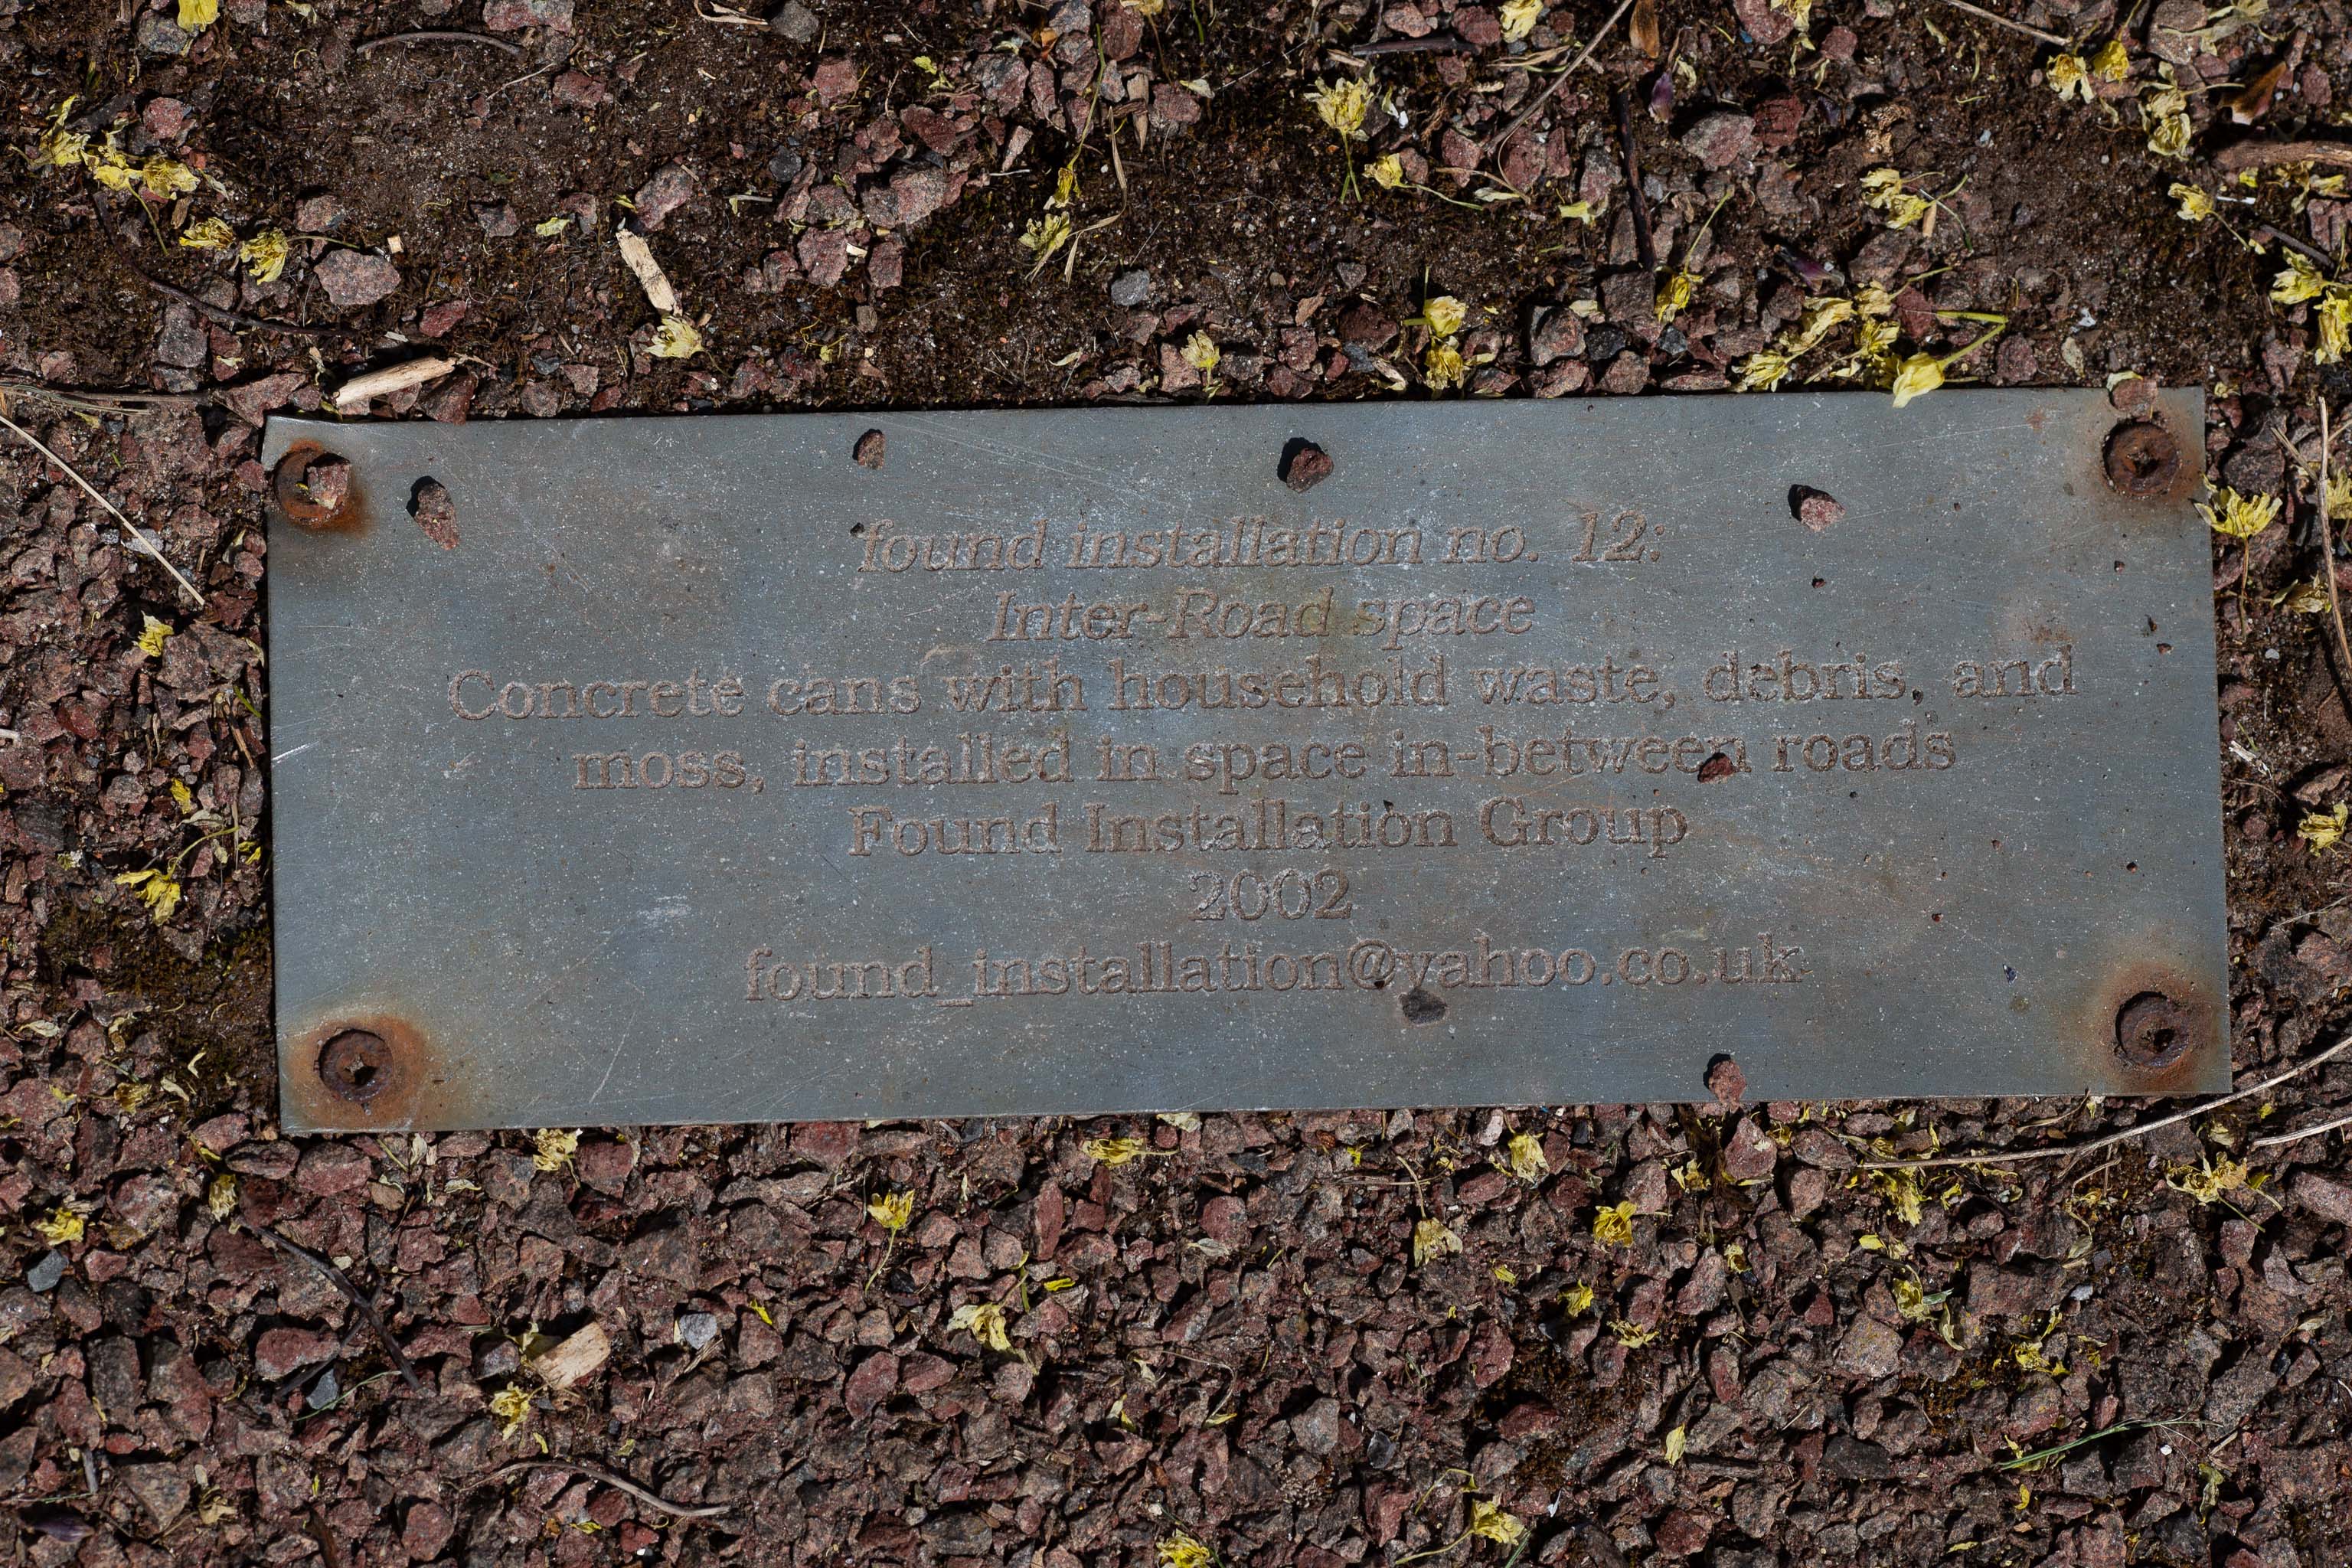 Found Installation
Have I ever noticed this plaque screwed into Cumberland Piazza before? Was it previously covered up by one of the massive rocks in the row here? Ei...